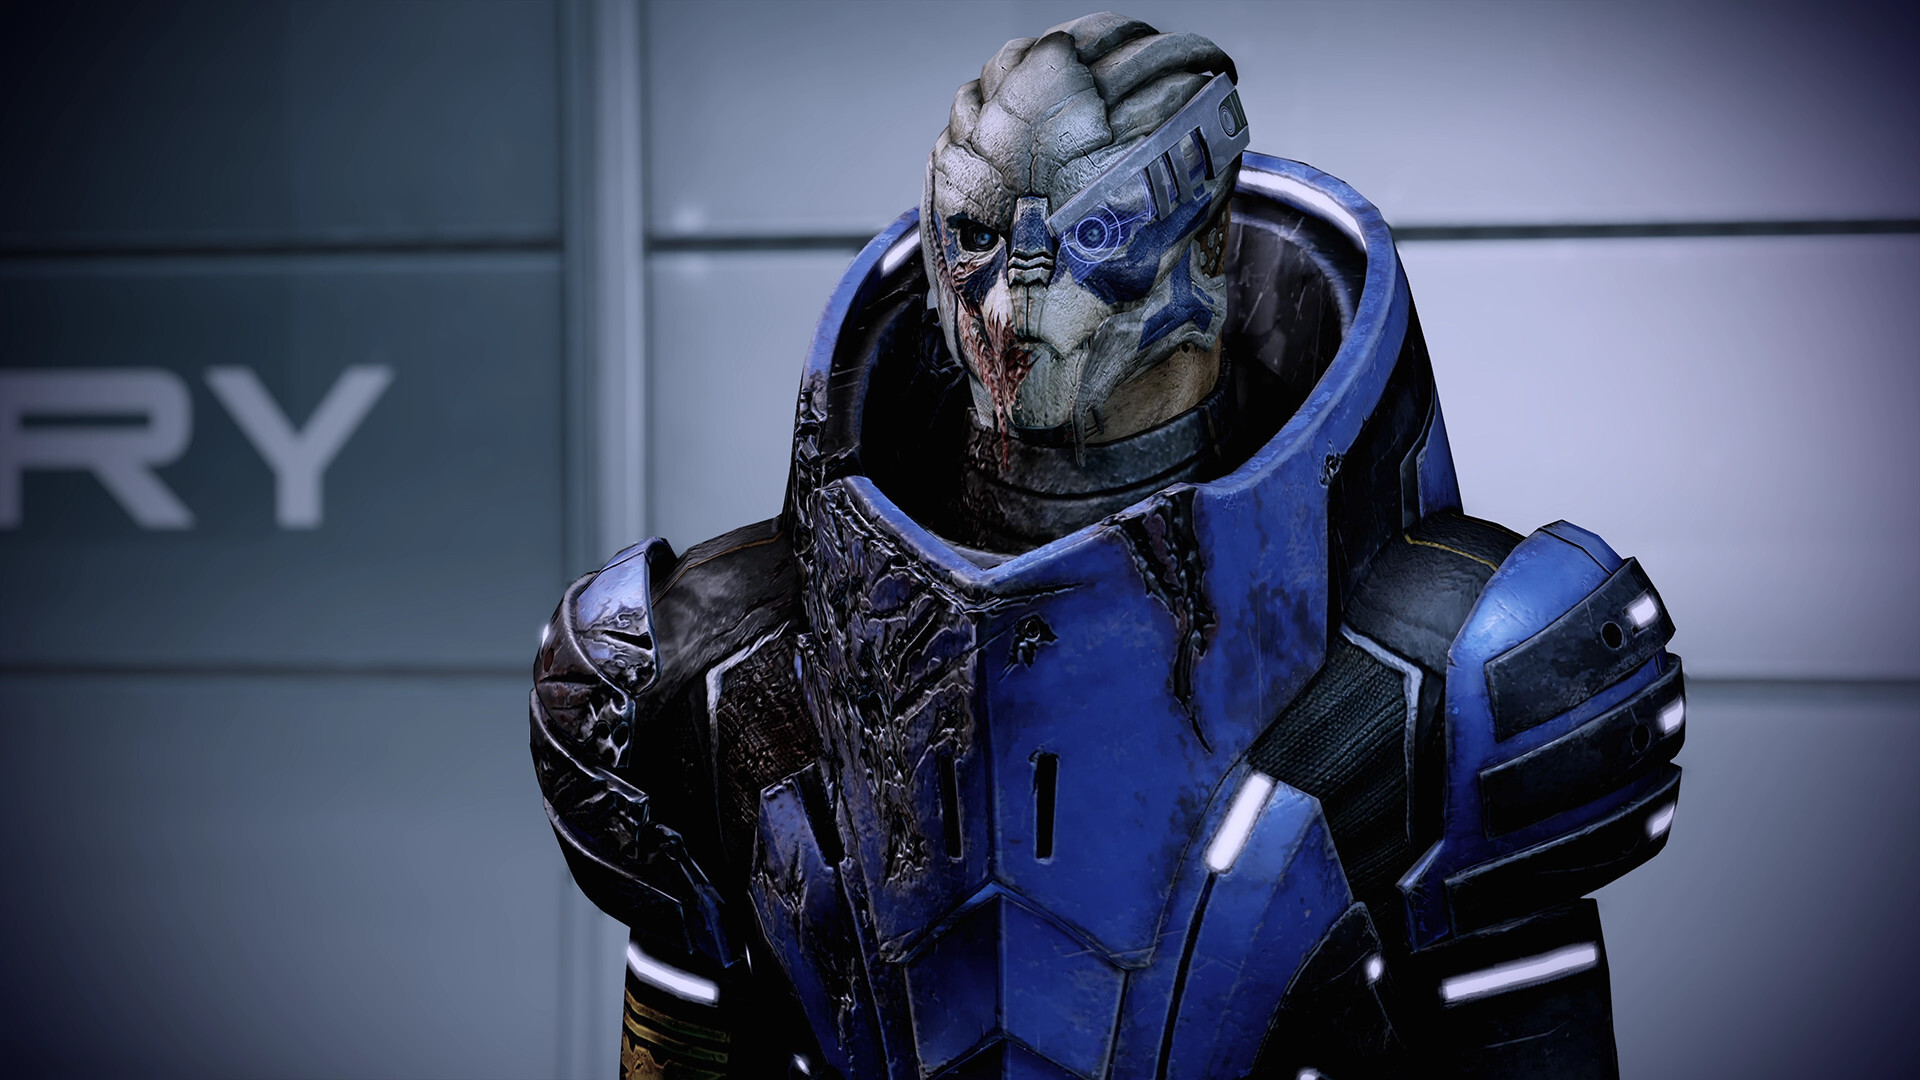 Garrus Vakarian: Mass Effect Legendary Edition, Normandy SR2 in the second part of the franchise, Developed by BioWare. 1920x1080 Full HD Background.